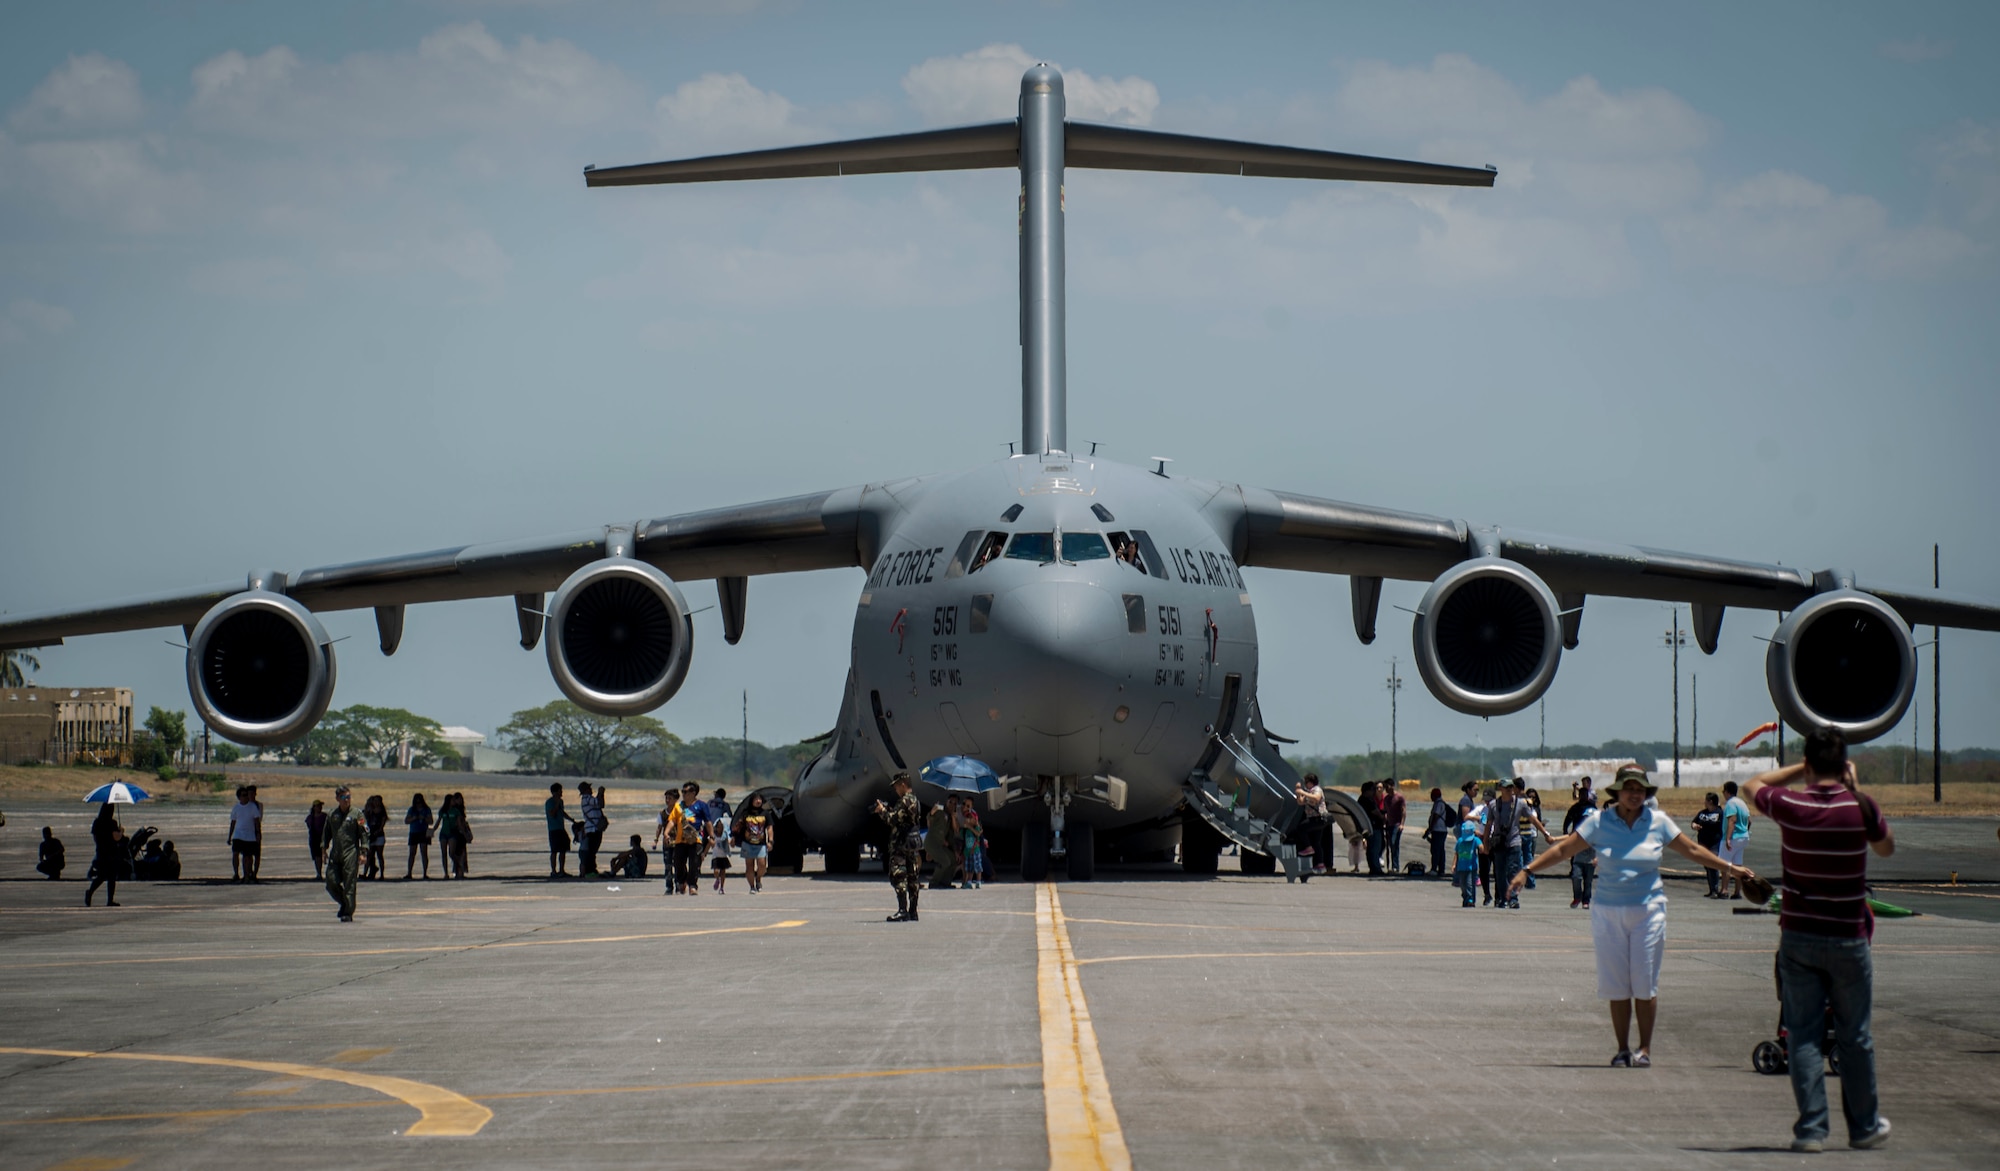 Locals take photos of a U.S. Air Force C-17 Globemaster III assigned to the 15th Wing, Hickam Air force Base, Hawaii during a static display at Clark Air Base, Philippines, April 9, 2016. U.S. military and Armed Forces of the Philippines hosted the event displaying various aircraft from all U.S. services and the Philippine Air Force. This year marks the 32nd iteration of Balikatan where U.S. service members continue to work “shoulder-to-shoulder” with members of the Armed Forces of the Philippines to increase combined readiness to crises and conflict across the Indo-Asia-Pacific region. (U.S. Air Force photo by Tech. Sgt. Araceli Alarcon/Released)